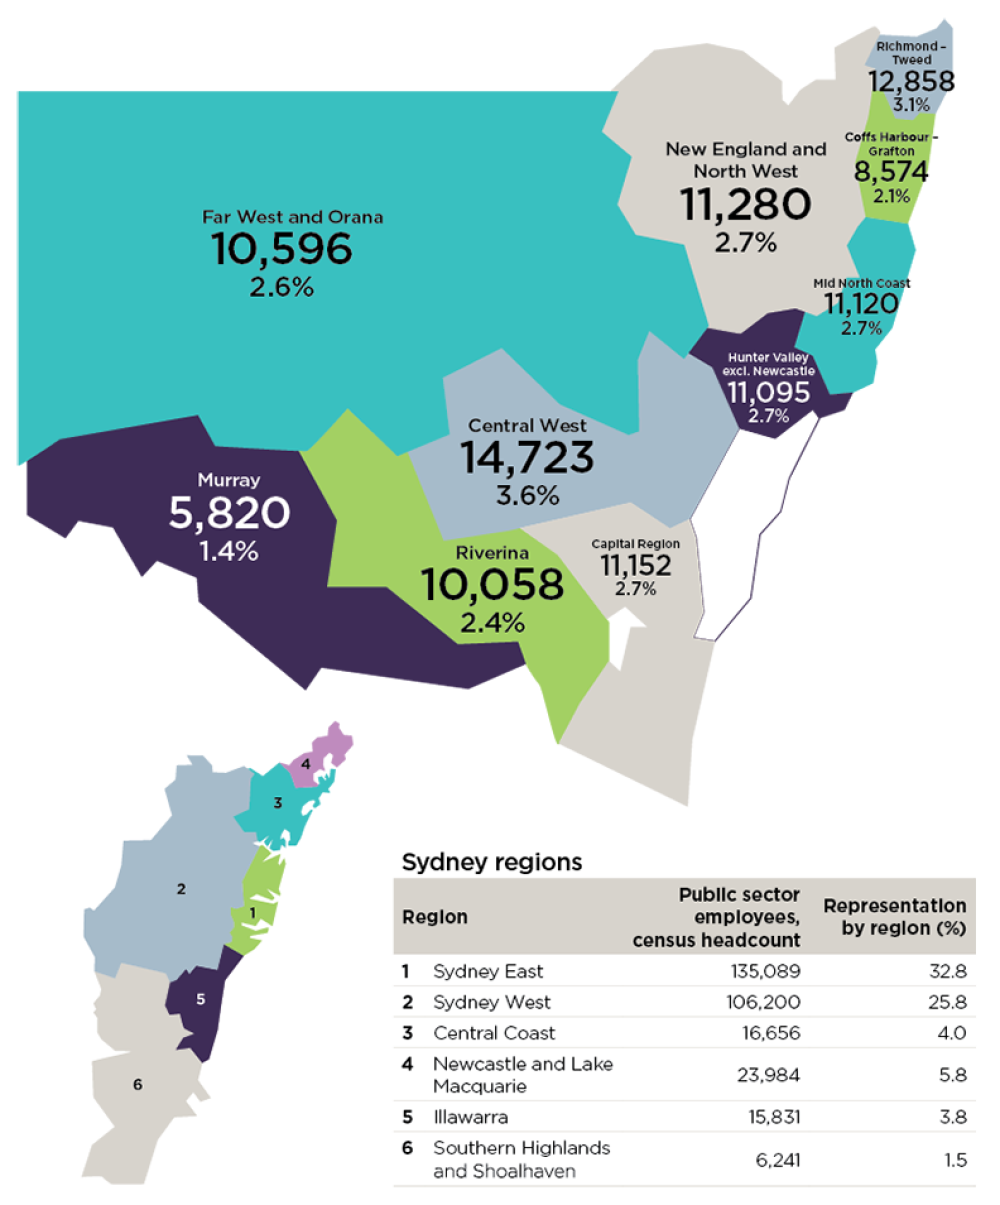 NSW public sector employees by region, census headcount, 2020